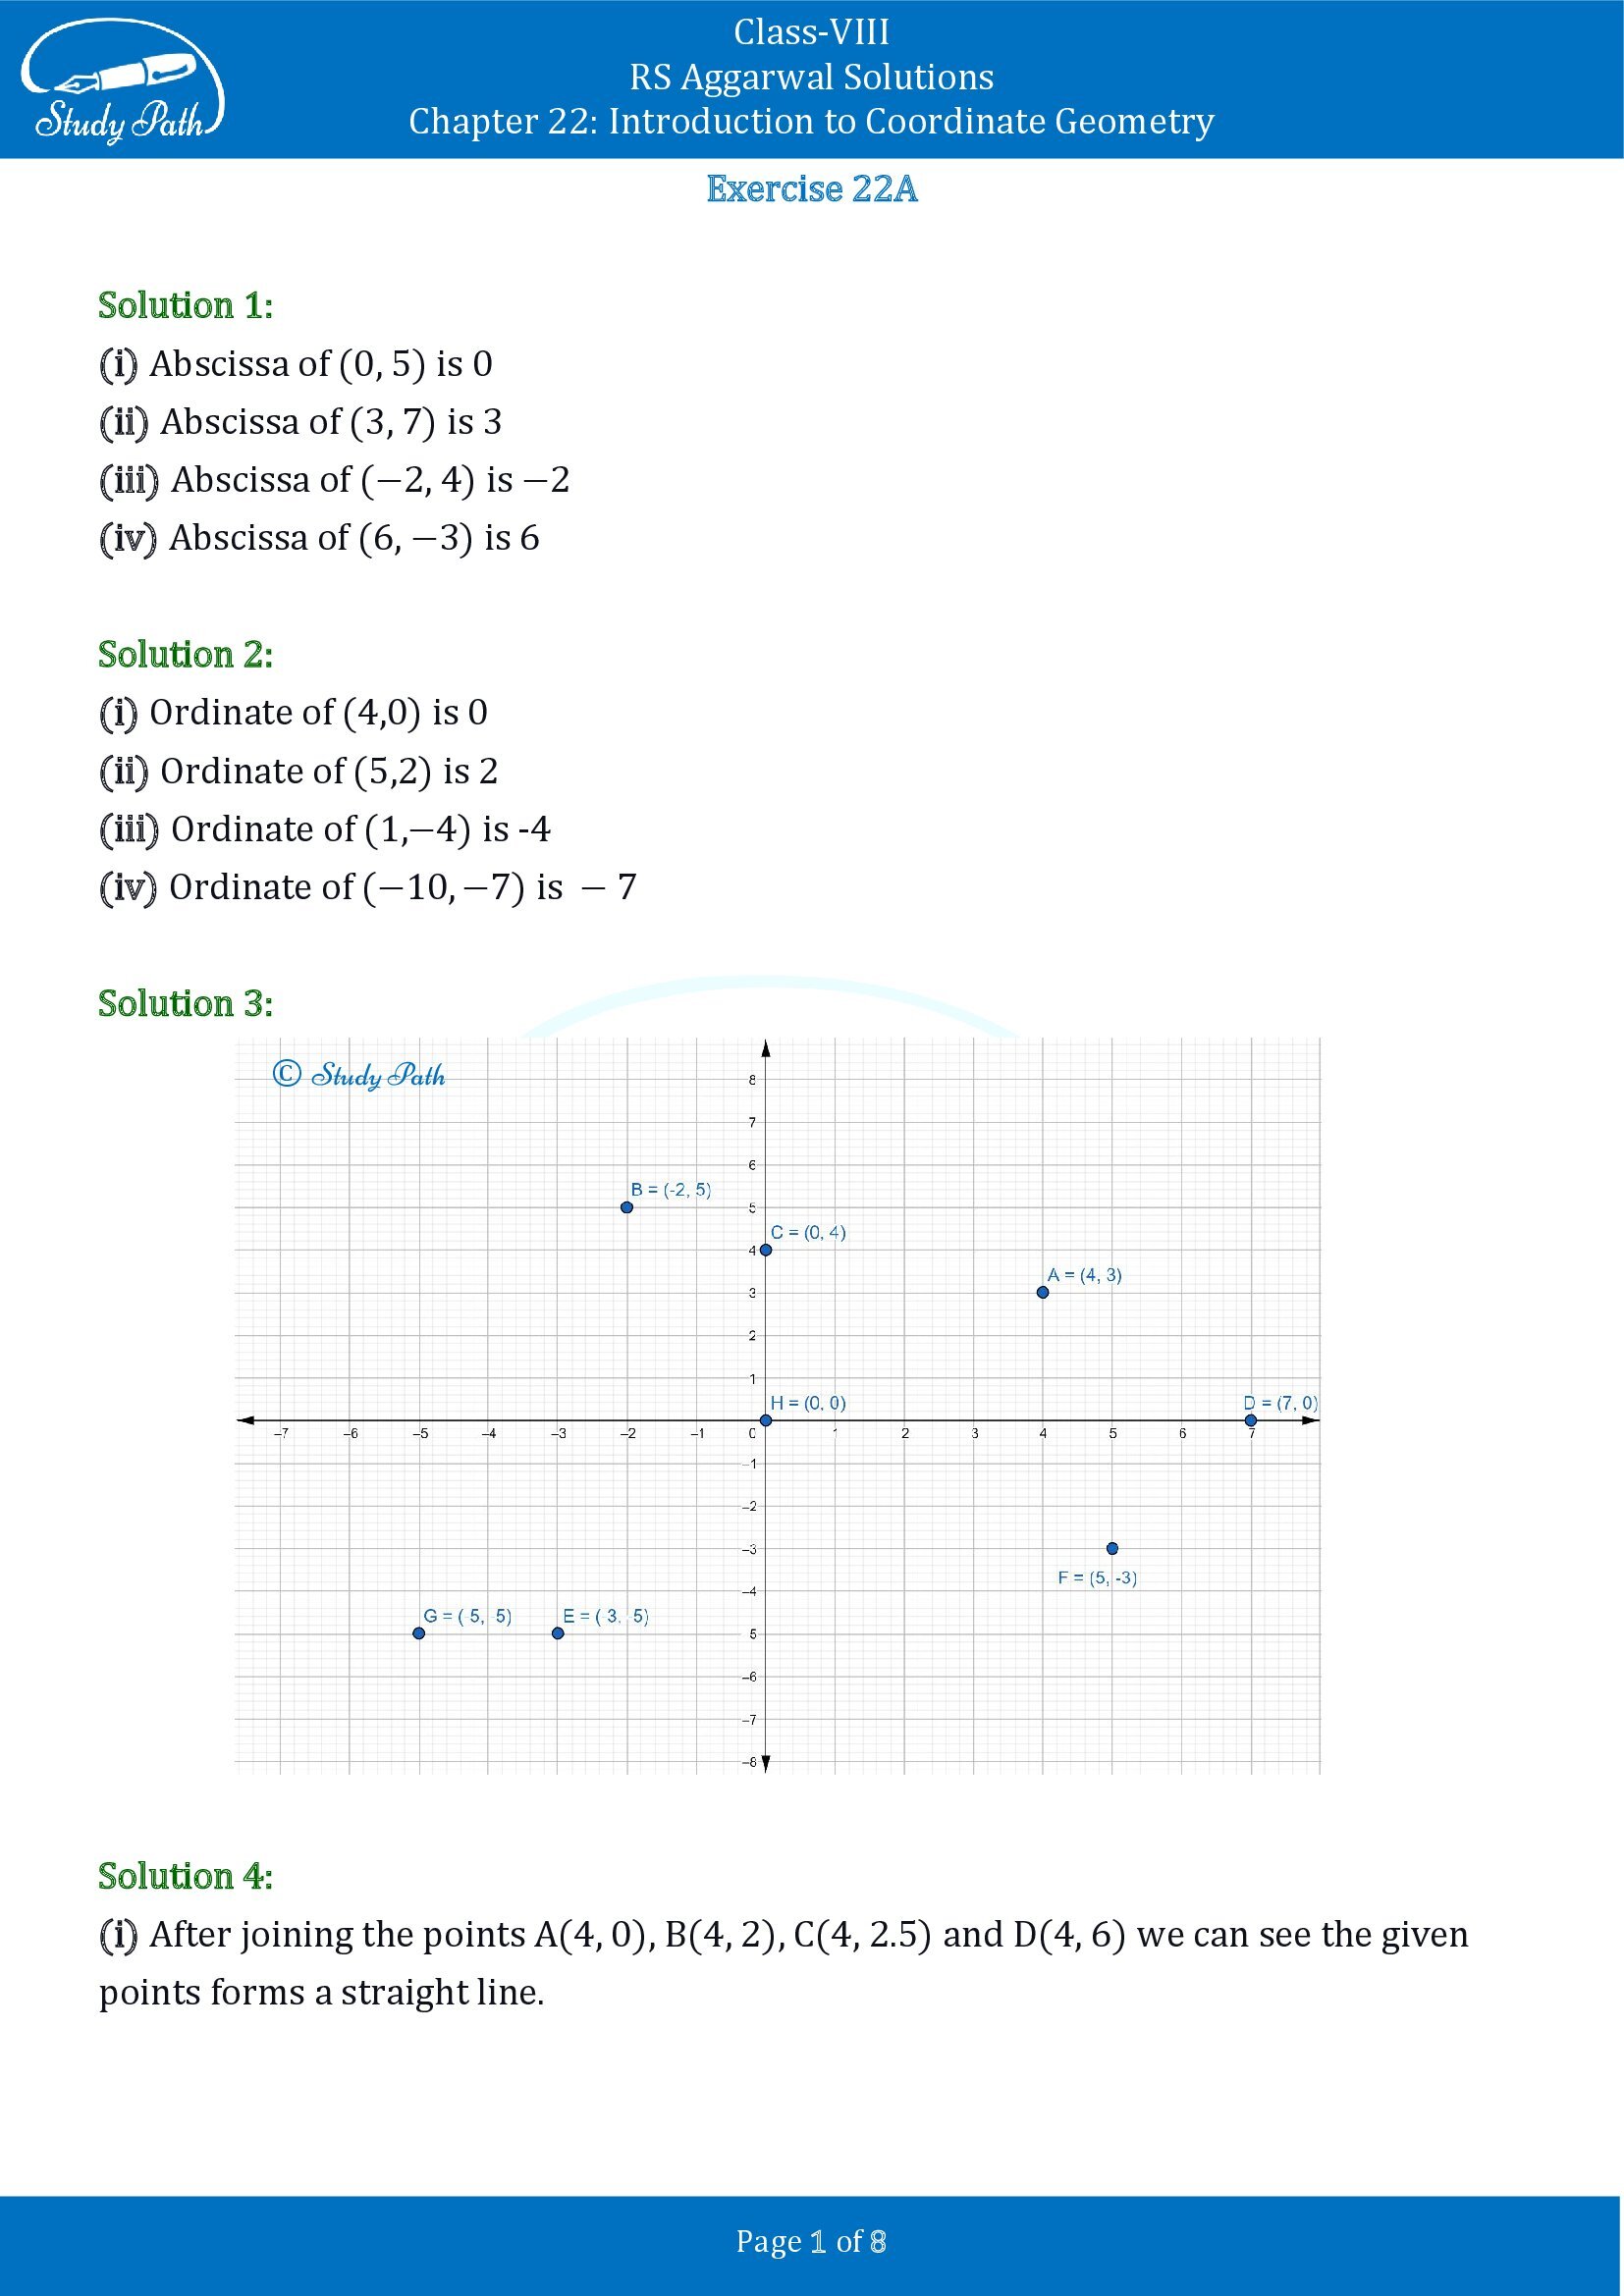 RS Aggarwal Solutions Class 8 Chapter 22 Introduction to Coordinate Geometry Exercise 22A 00001